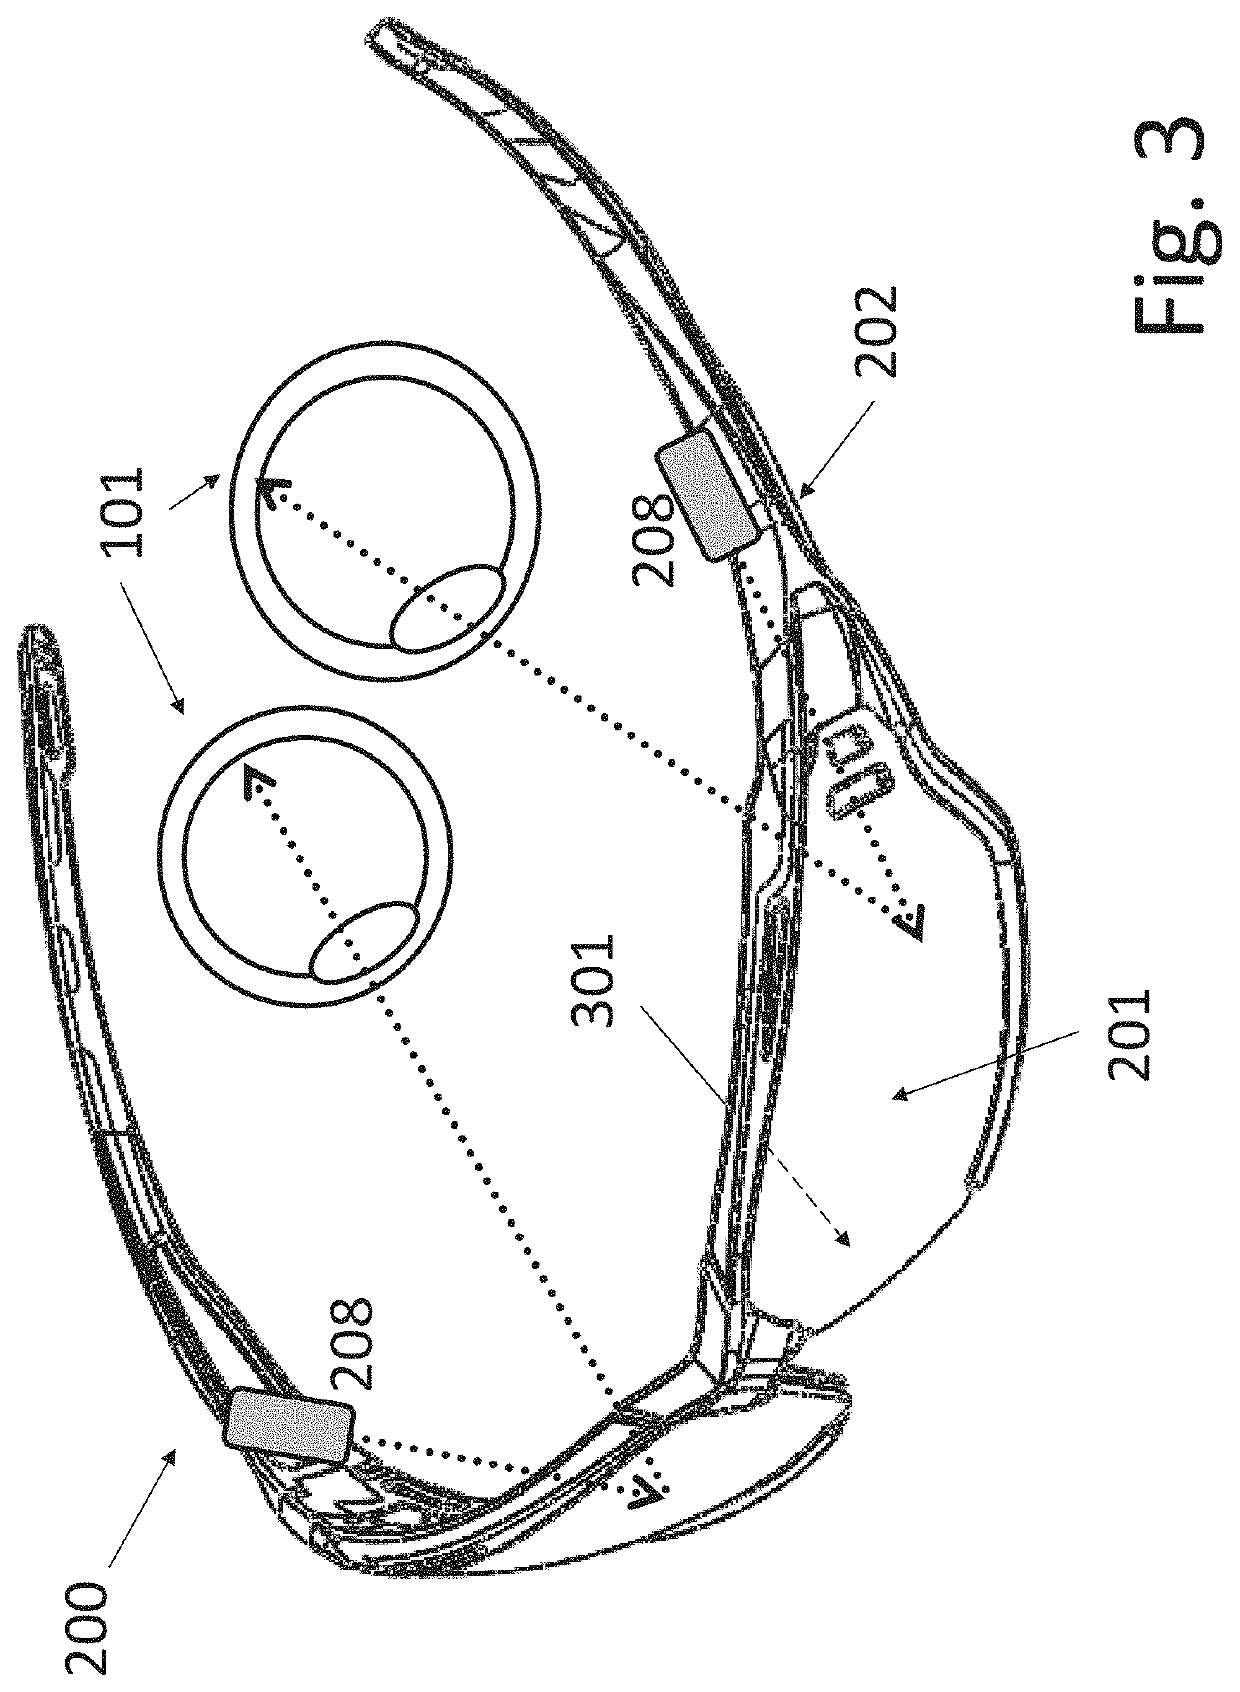 Electronic visual headset with vision correction